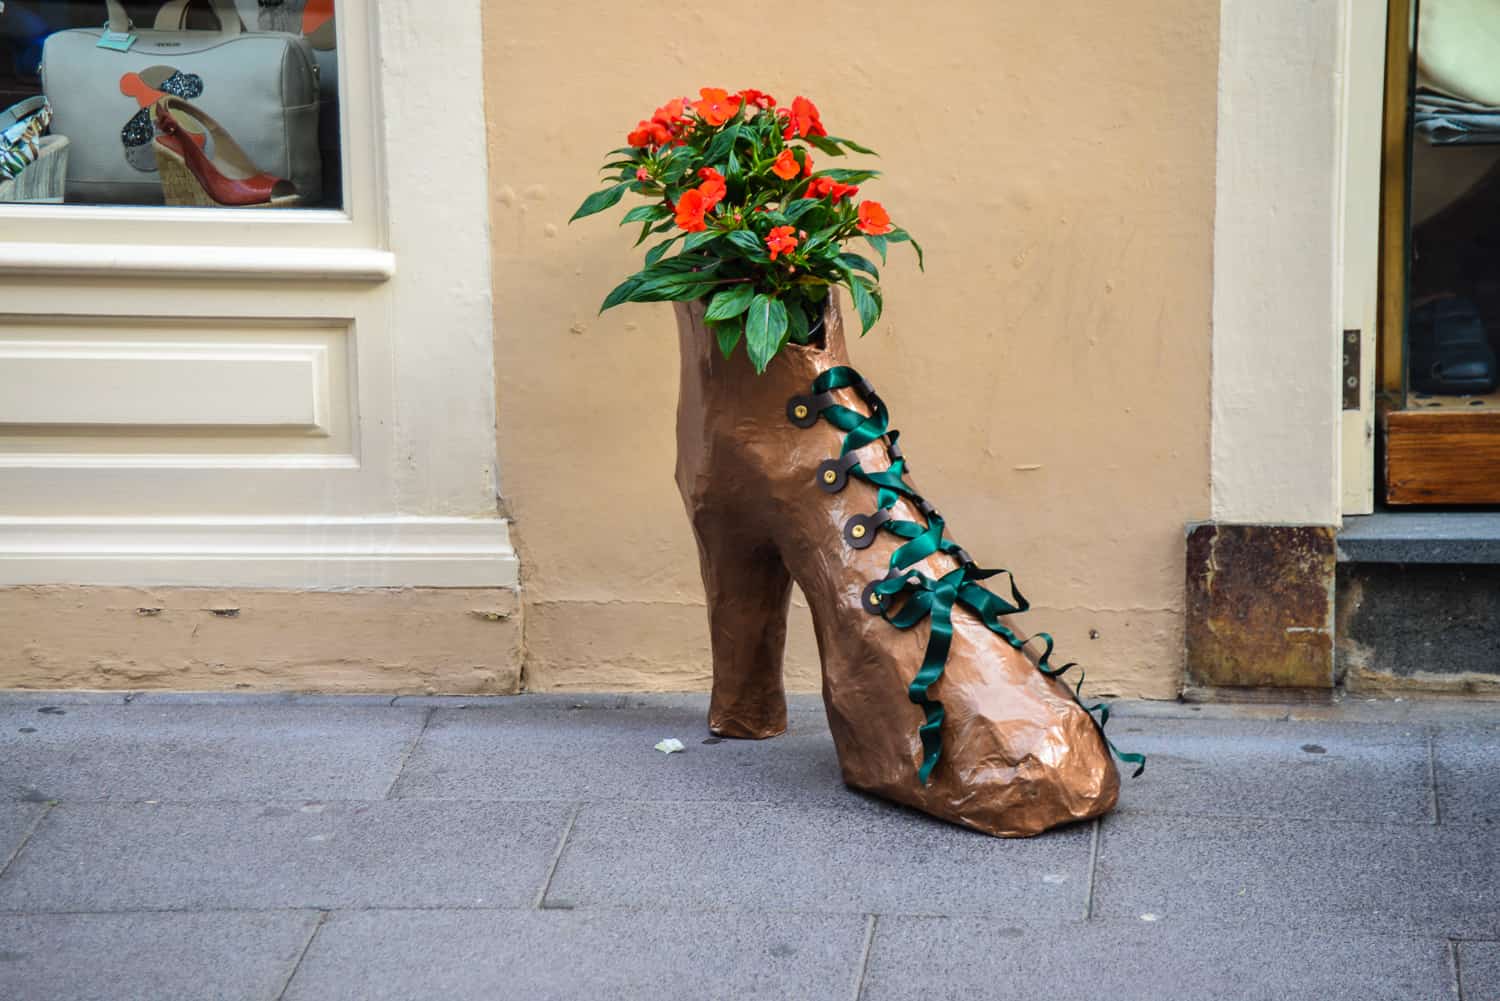 Is this outside a shoe shop or a flower shop?